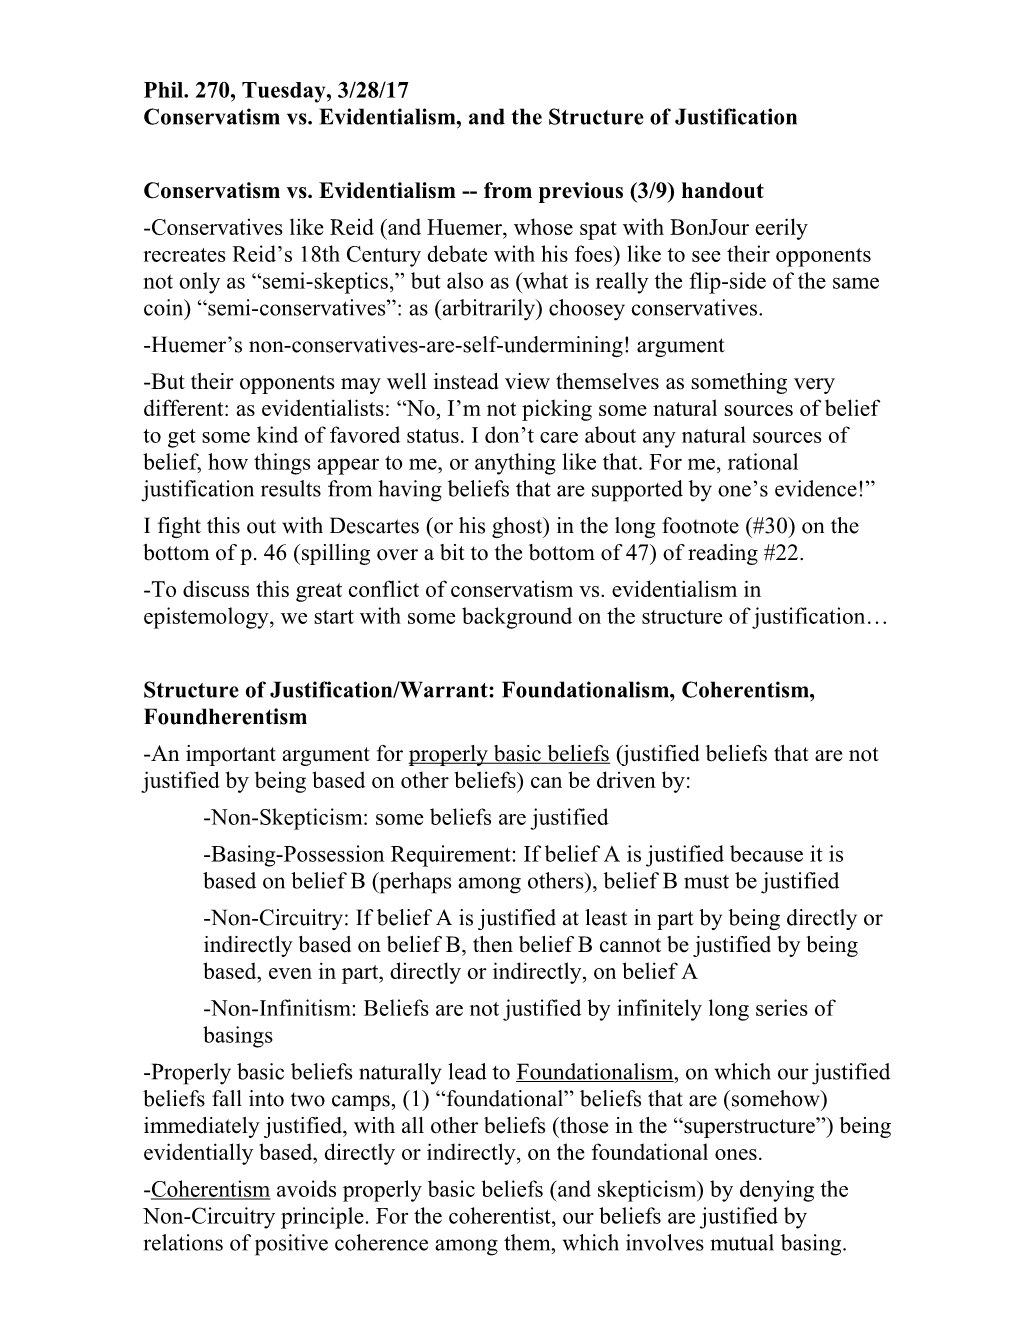 Conservatism Vs. Evidentialism from Previous (3/9) Handout